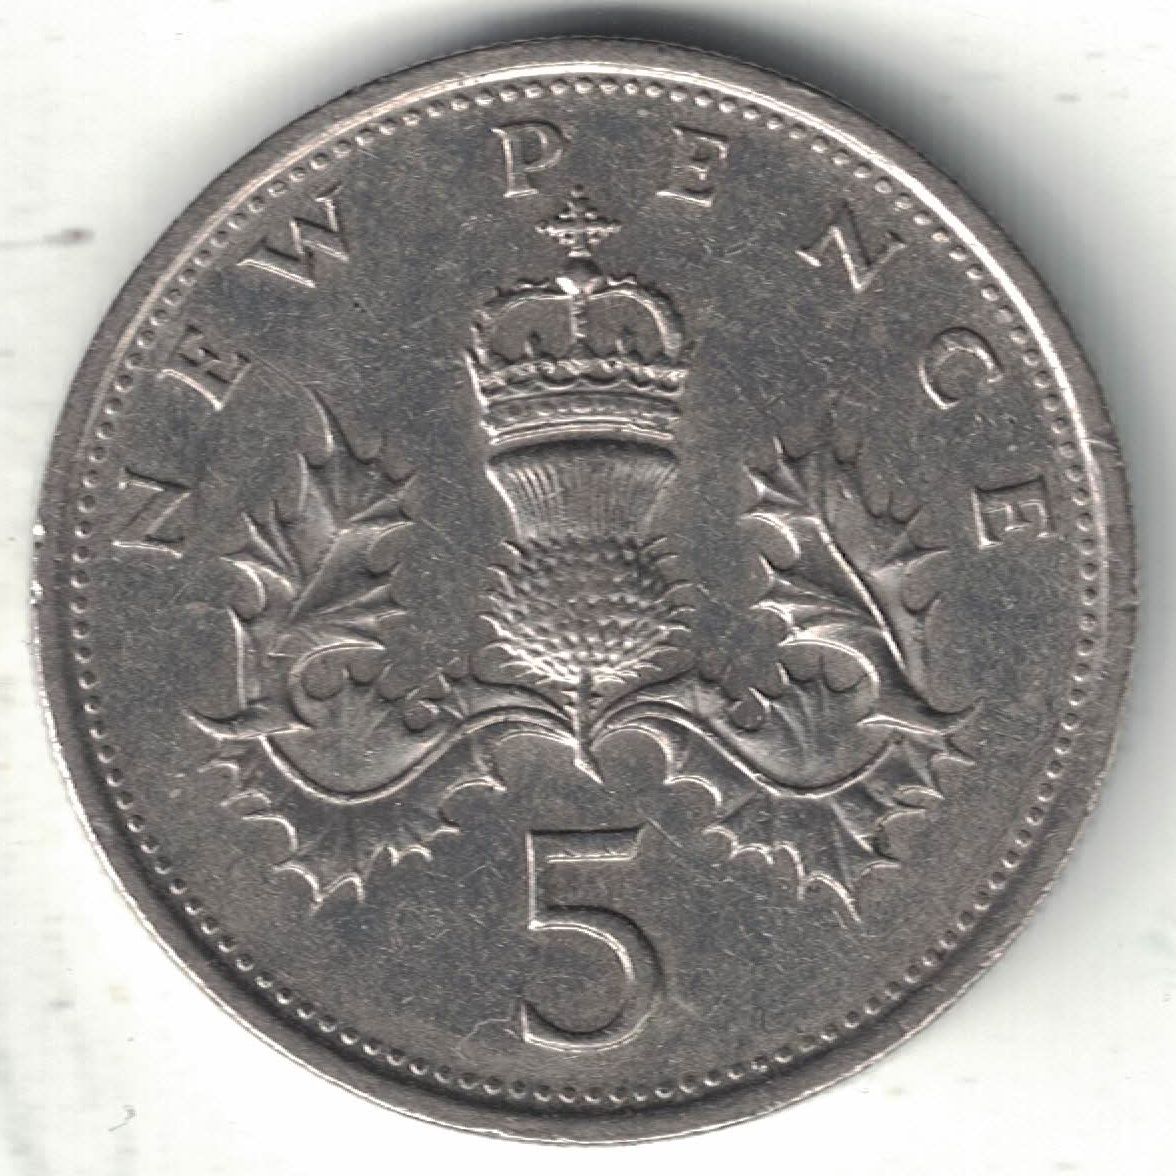 British 5 Pence Old Coin